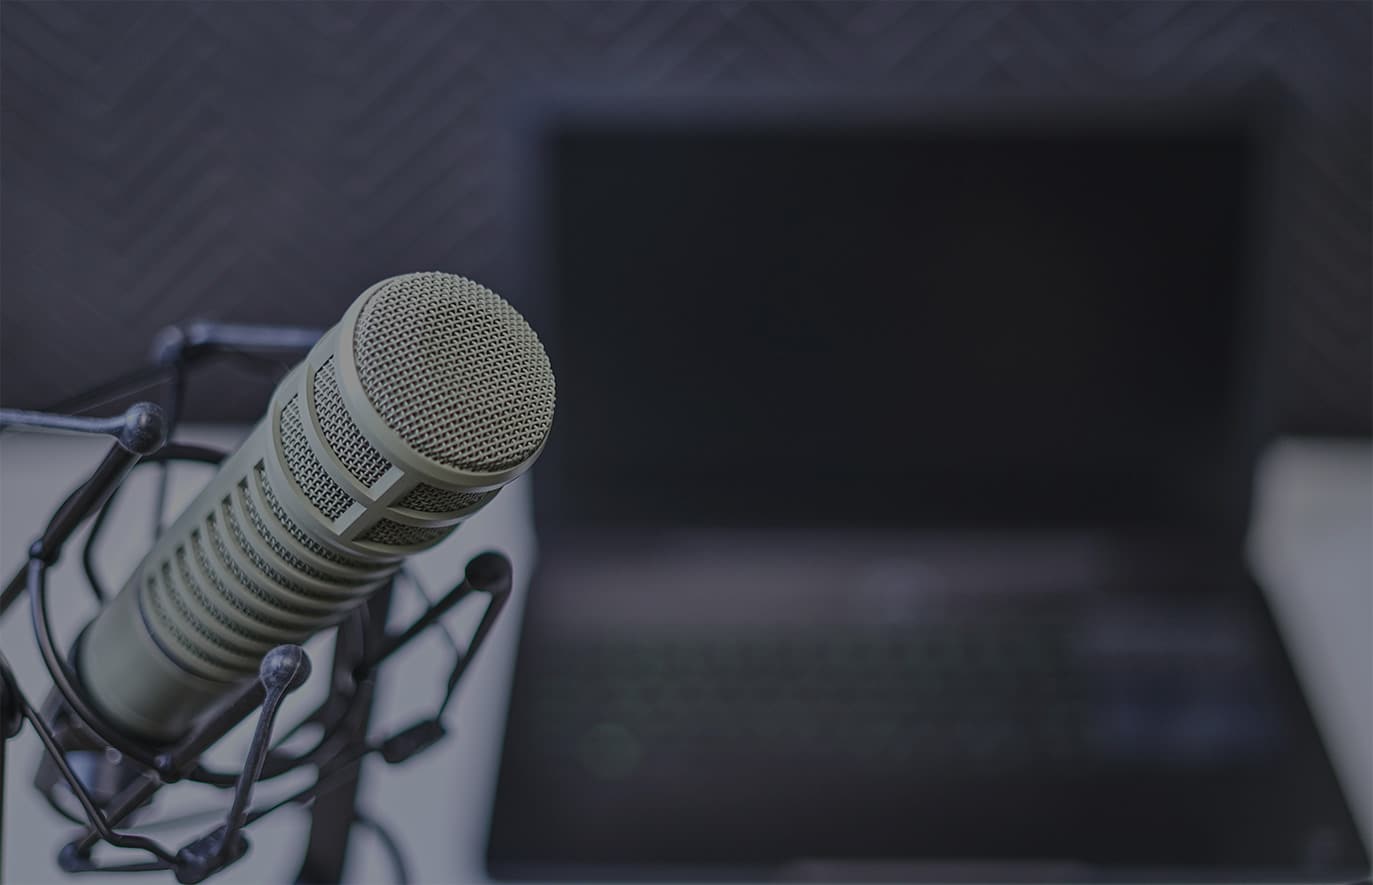 FCPA Compliance & Ethics Podcast featuring Jerry Coyne — The Use of Monitors by State Attorneys General: Ep. 1